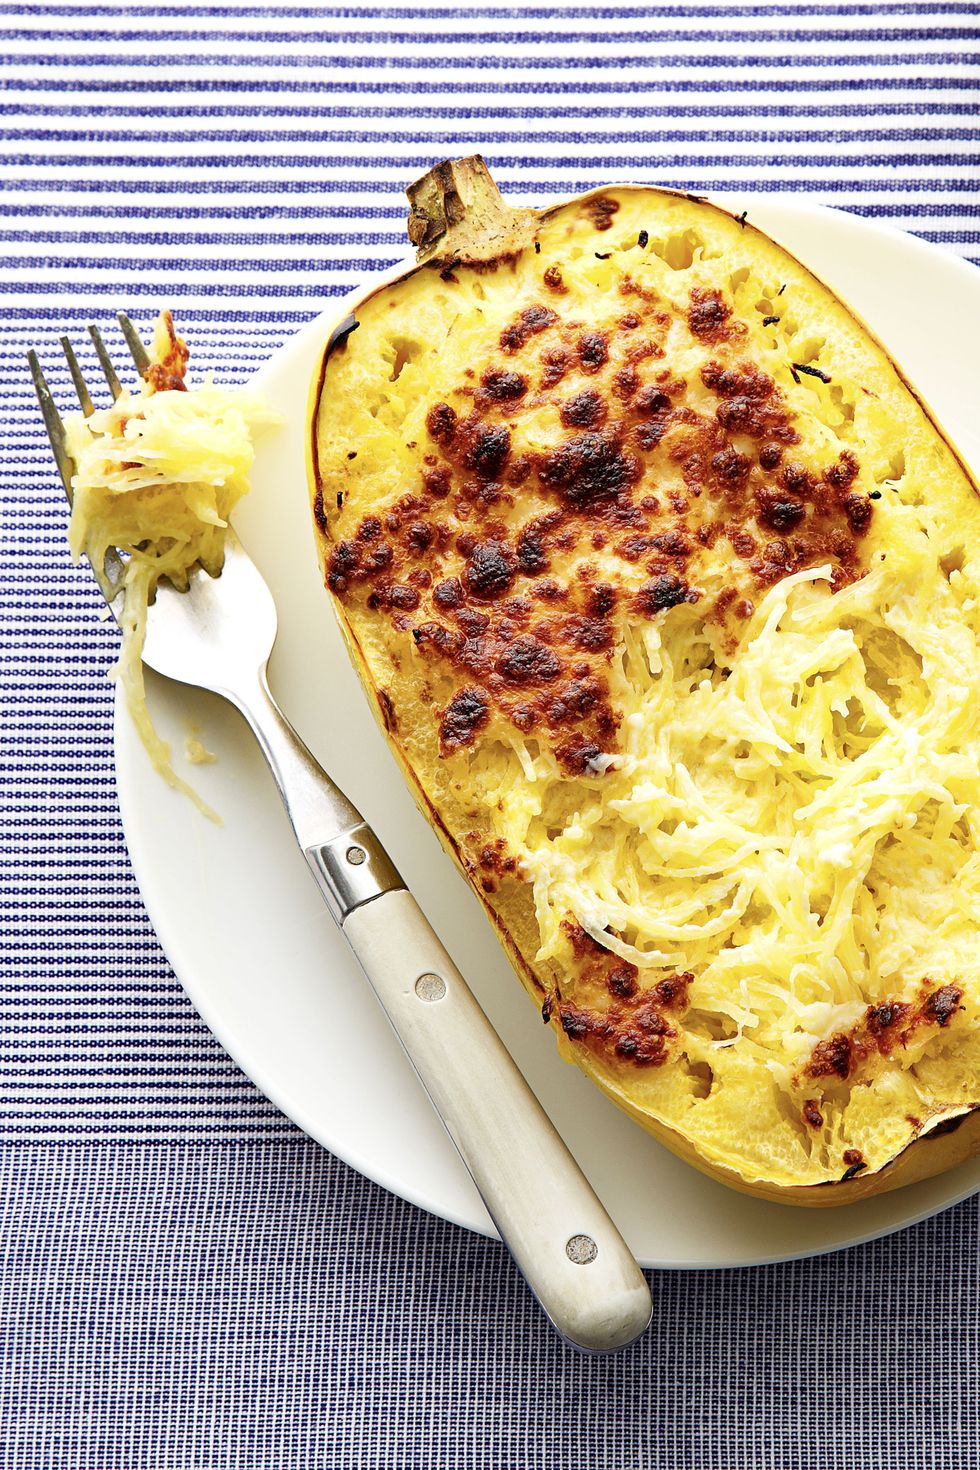 healthy spaghetti squash with cheese on top